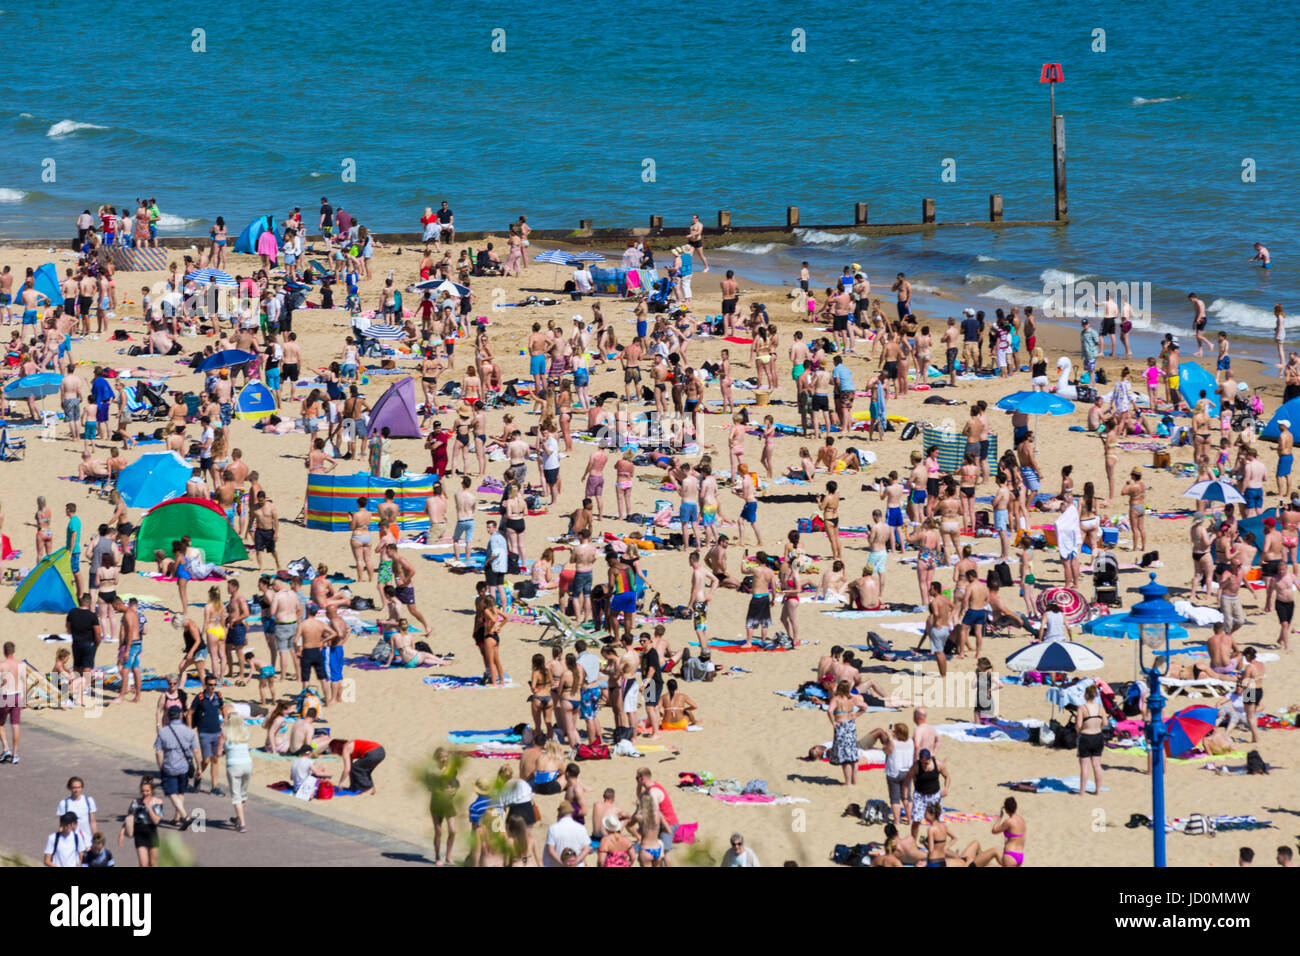 Bournemouth, Dorset, UK. 17th June, 2017. Fire at Bournemouth beach on the hottest day of the year with crowded beaches on a day with hot sunny weather. It was believed a smoke bomb was thrown into the bushes behind the beach huts at Eastcliff which set fire to gorse bushes and went up in smoke as beach goers looked on. Credit: Carolyn Jenkins/Alamy Live News Stock Photo